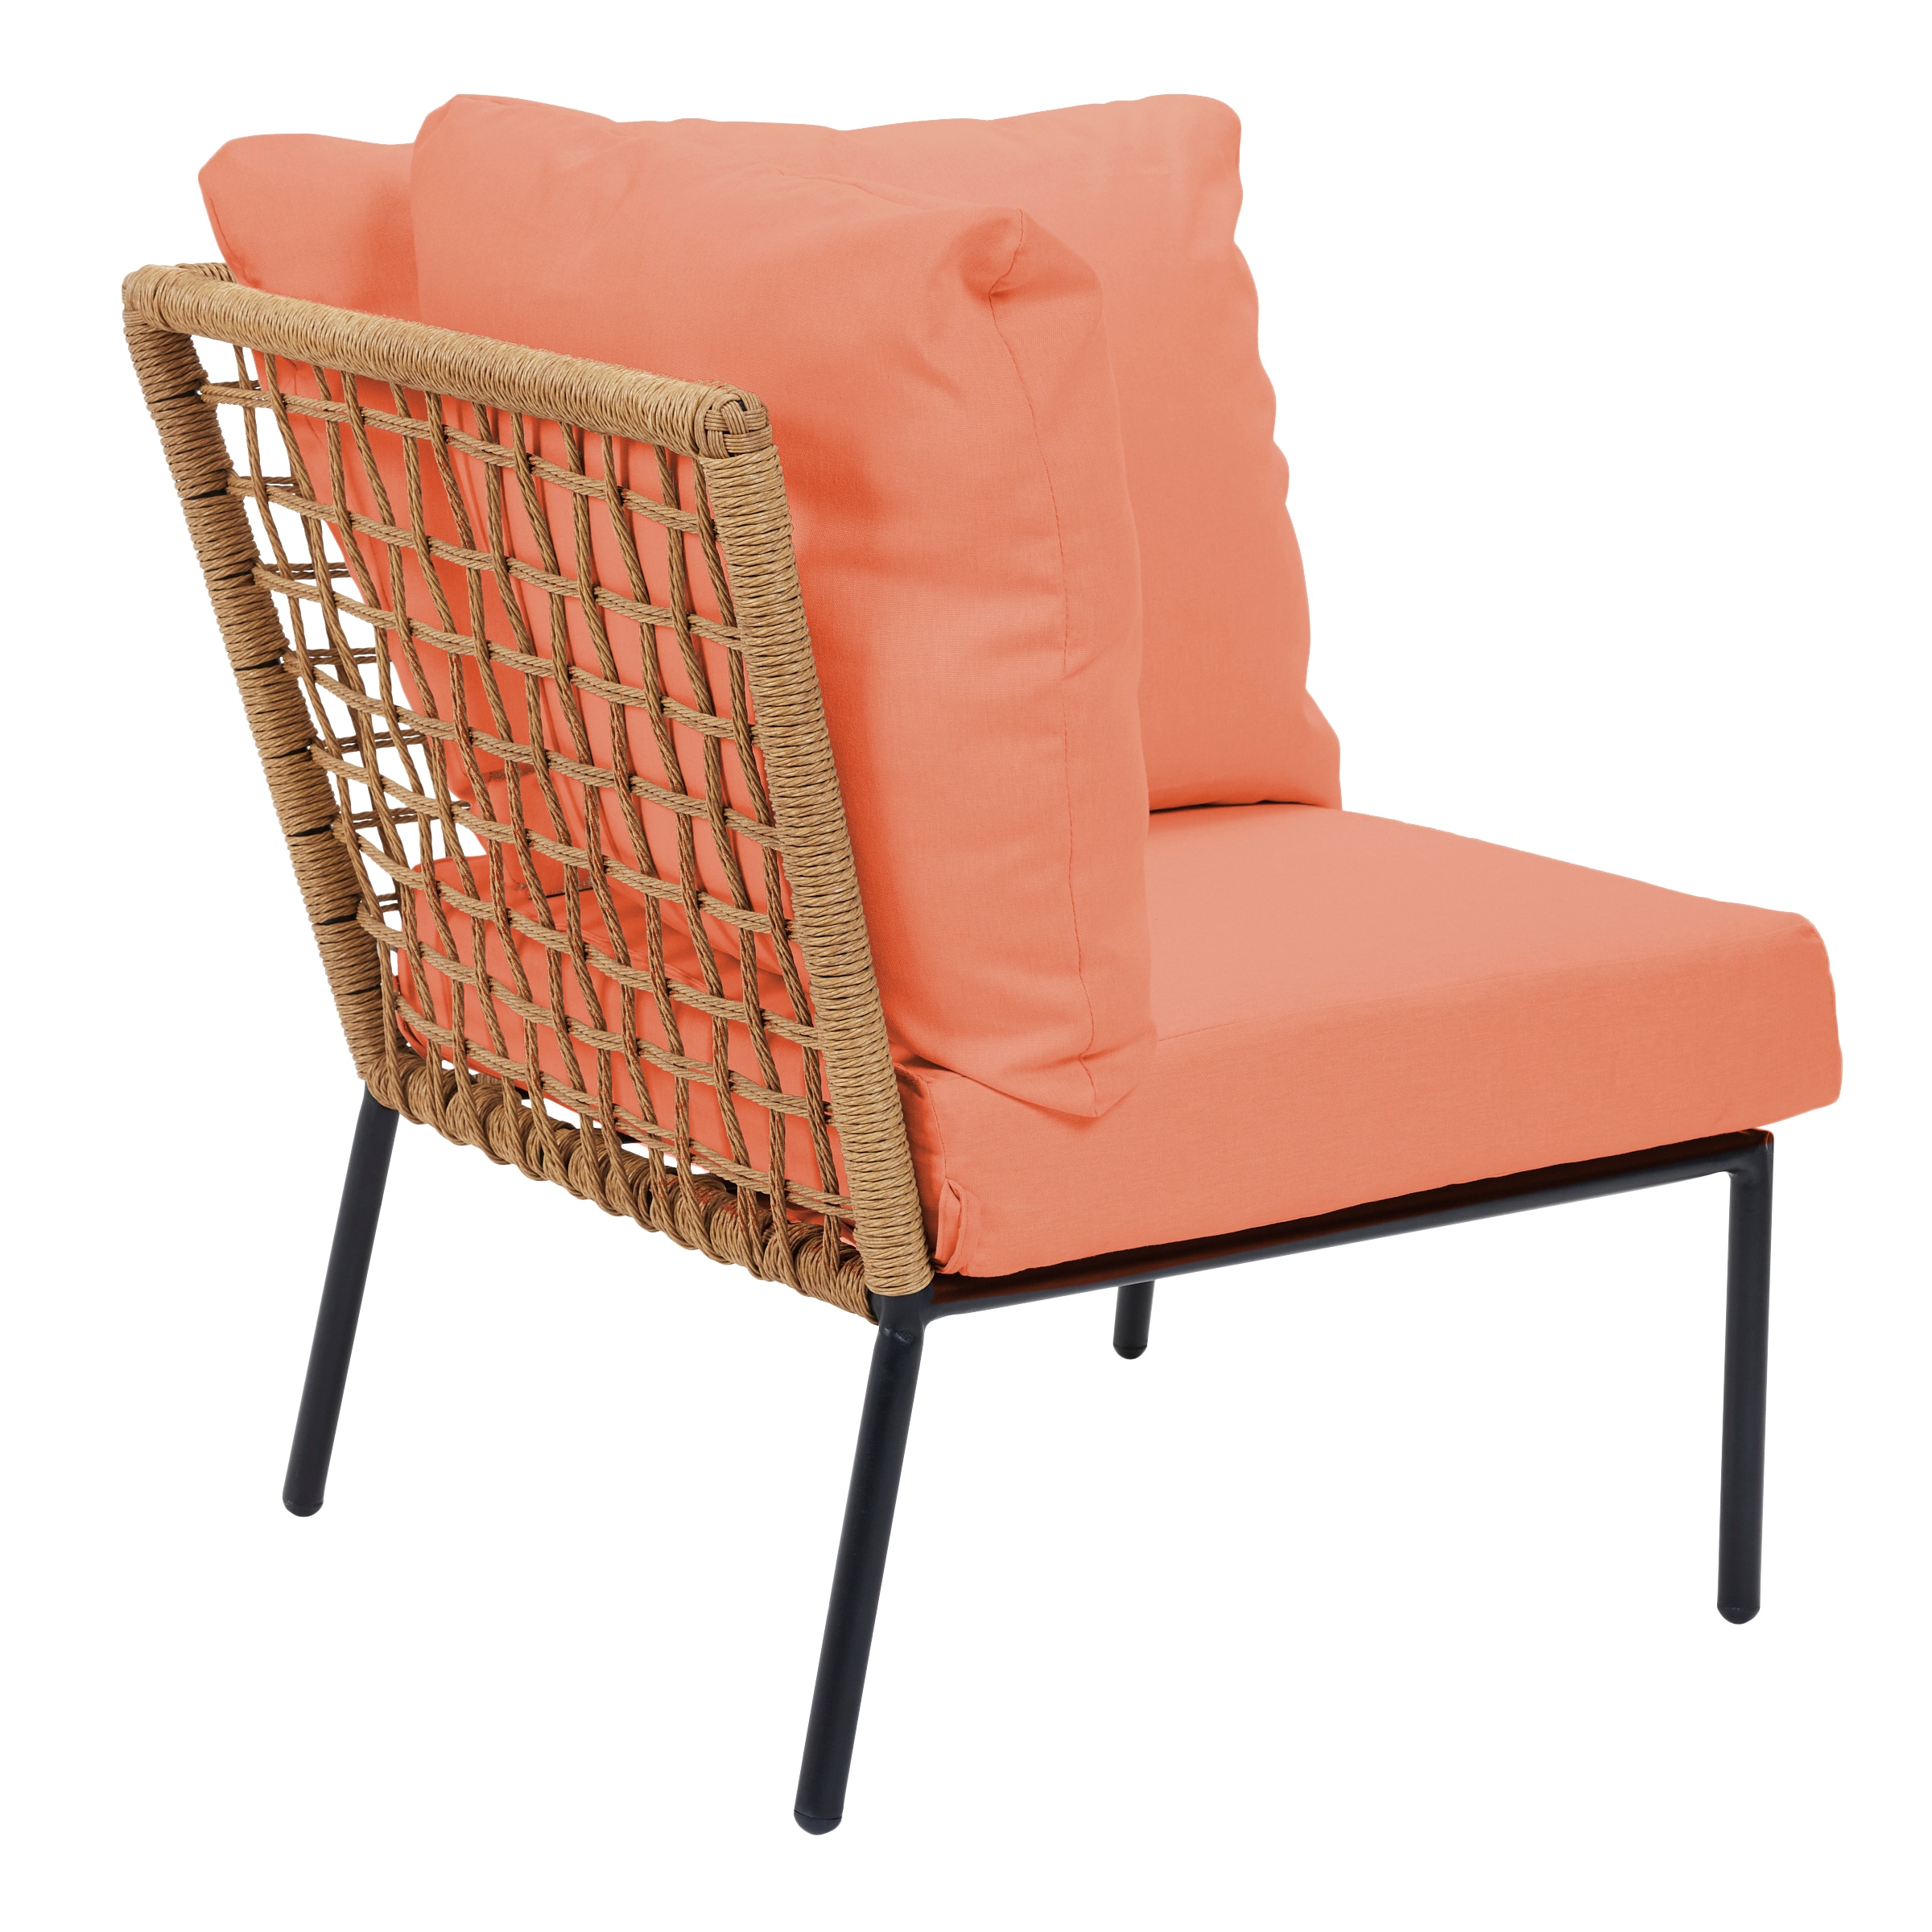 Origin 21 Clairmont 4-Piece Wicker at Patio Patio Conversation Cushions with department Orange Conversation in Set Sets the